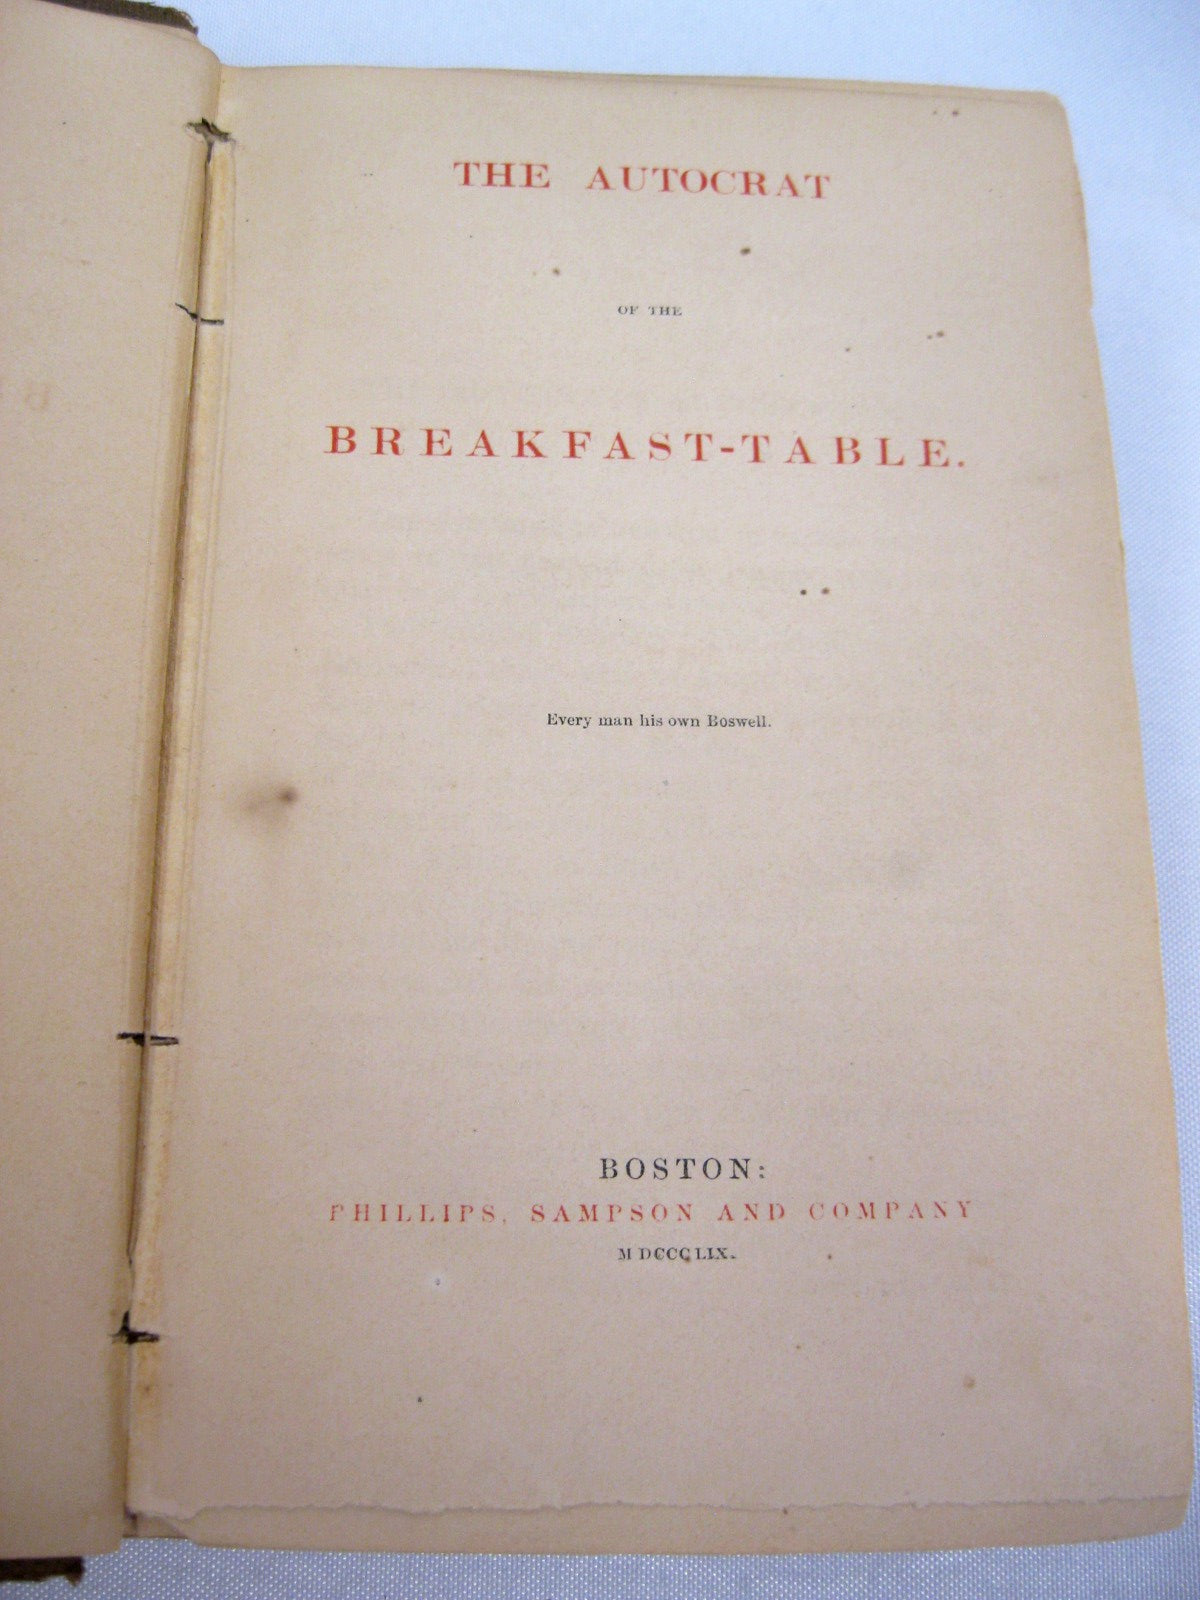 Autocrat of the Breakfast-Table by Oliver Wendell Holmes